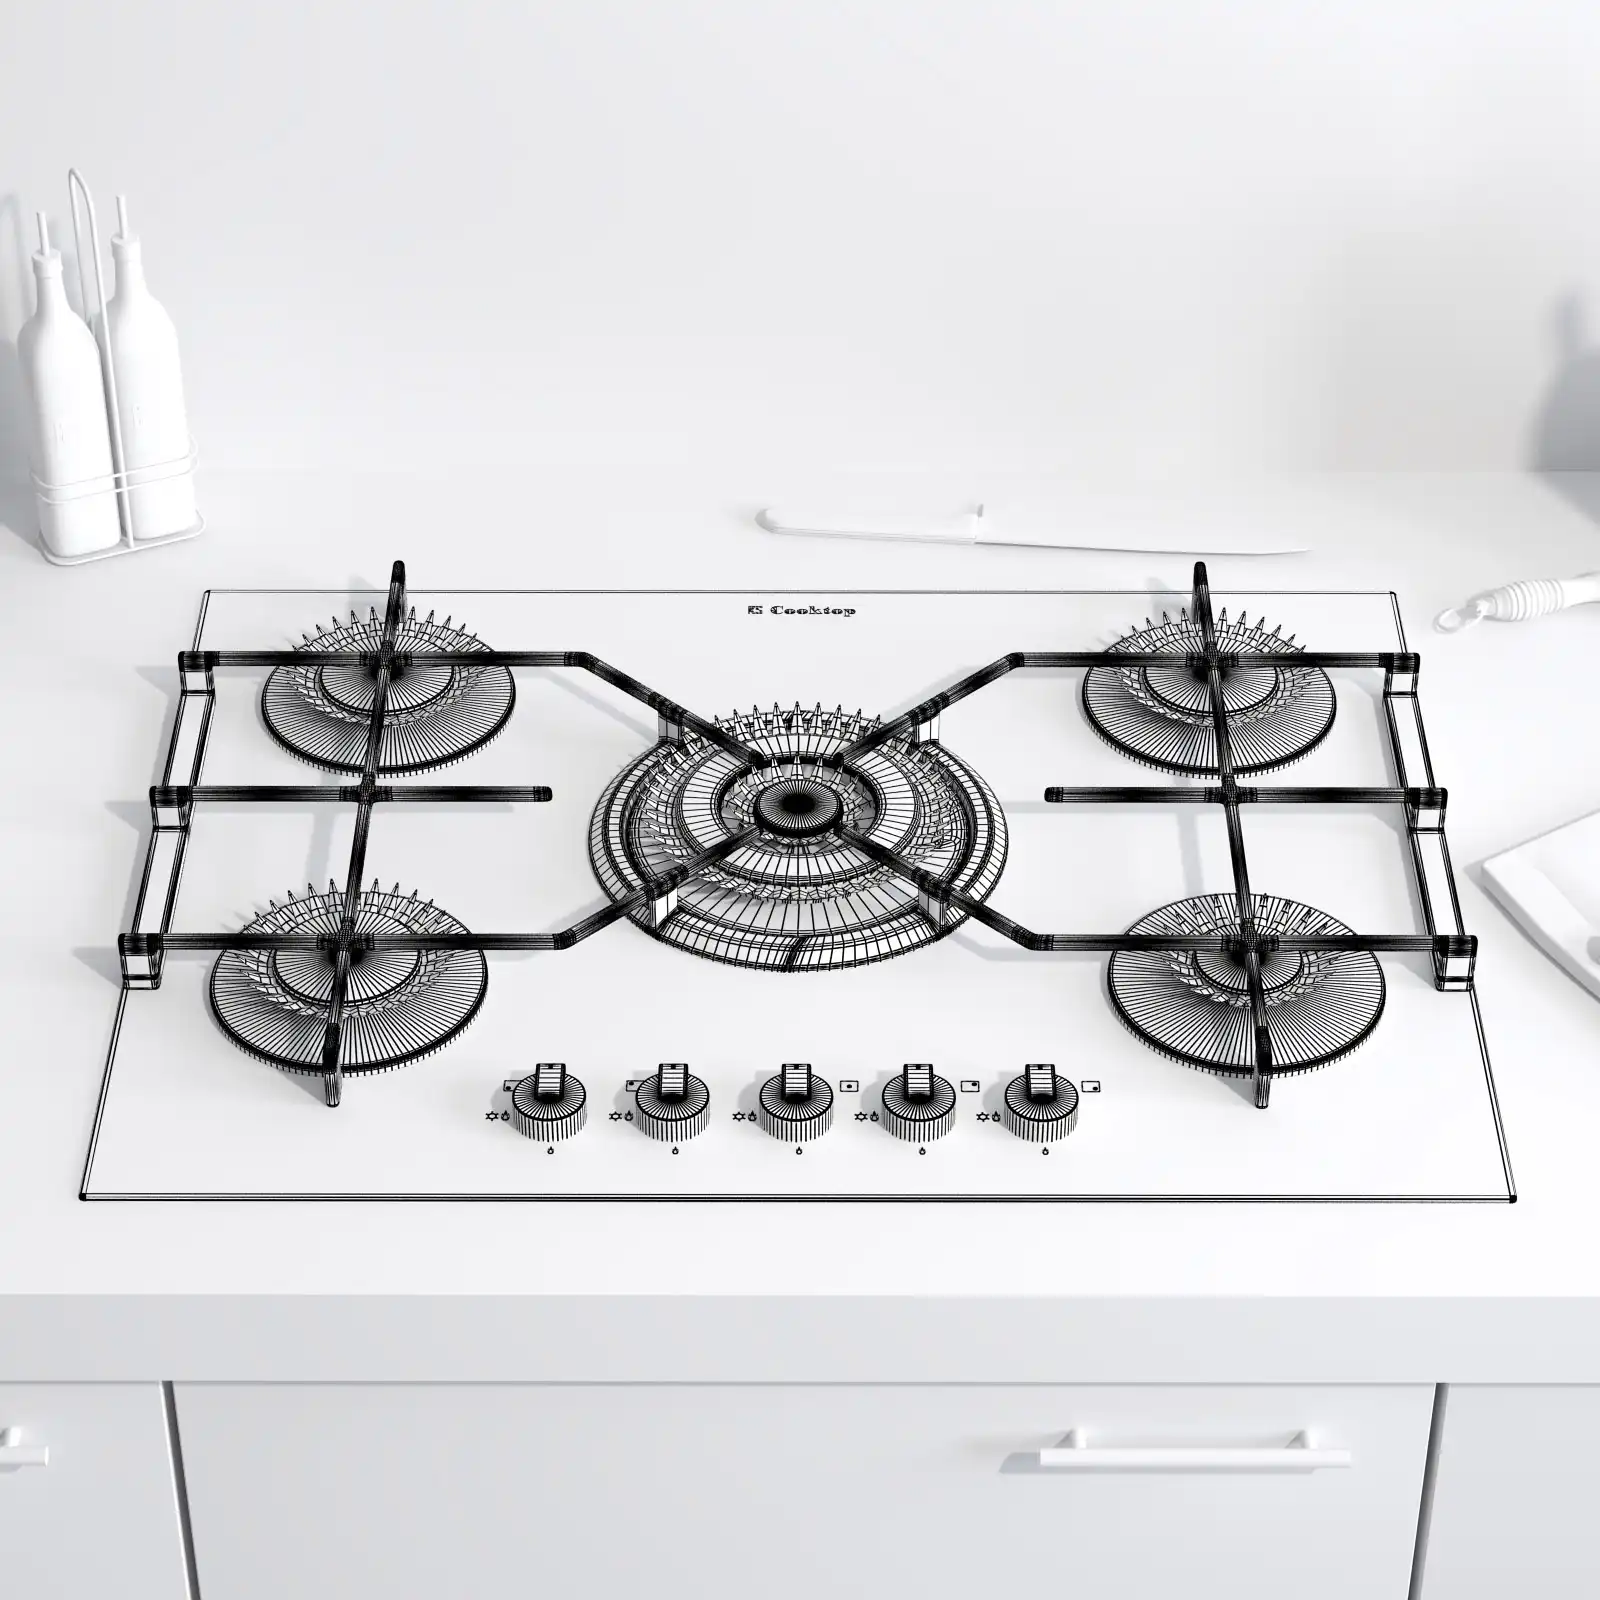 Wireframe rendering of a 3d model of a black cooktop with a large gas burner in the interior.